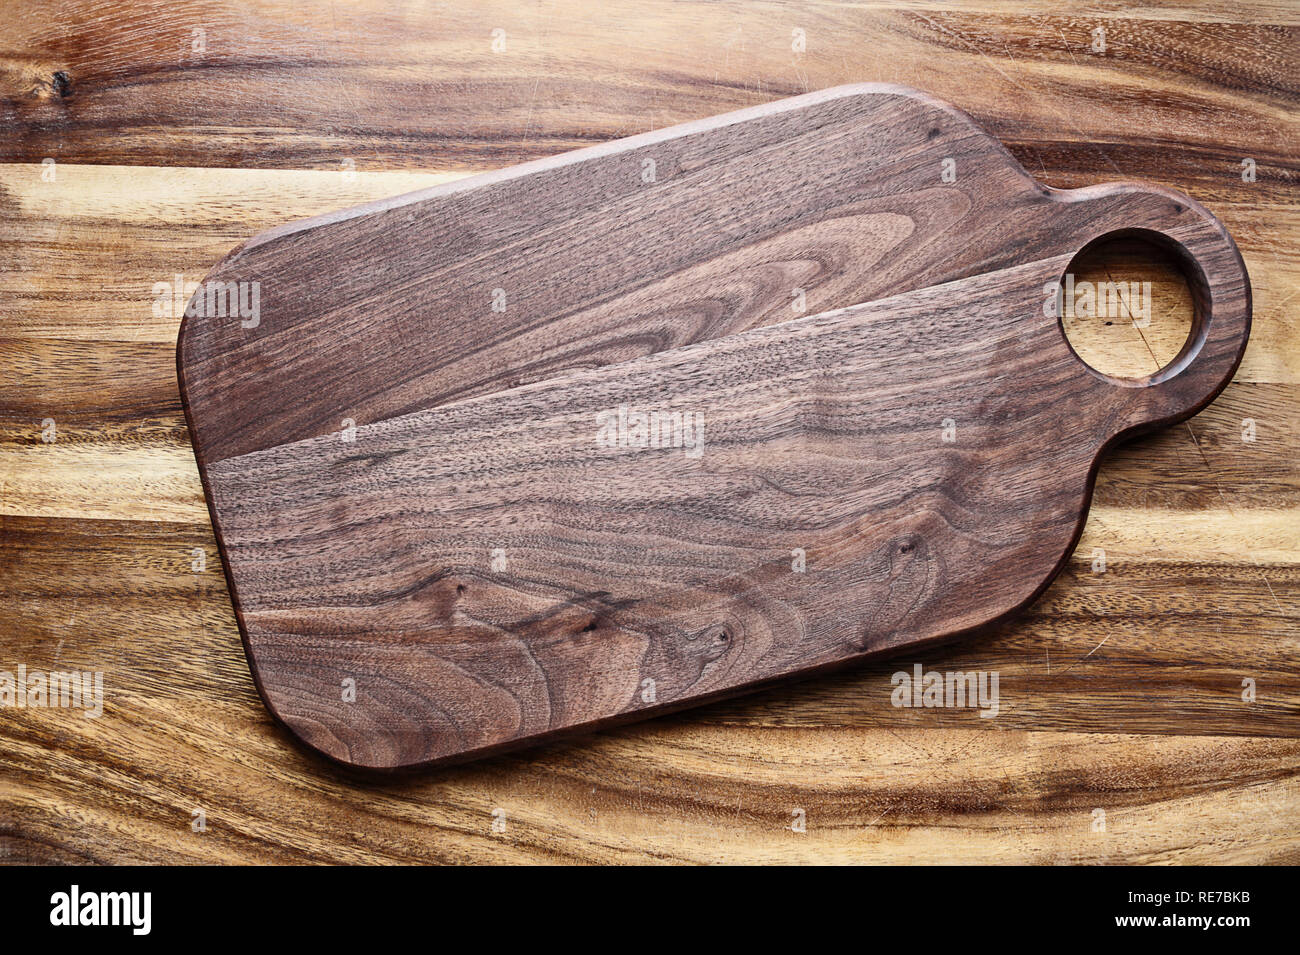 https://c8.alamy.com/comp/RE7BKB/walnut-wooden-cutting-board-with-round-handle-hold-over-oak-table-top-image-shot-from-above-in-flat-lay-position-RE7BKB.jpg